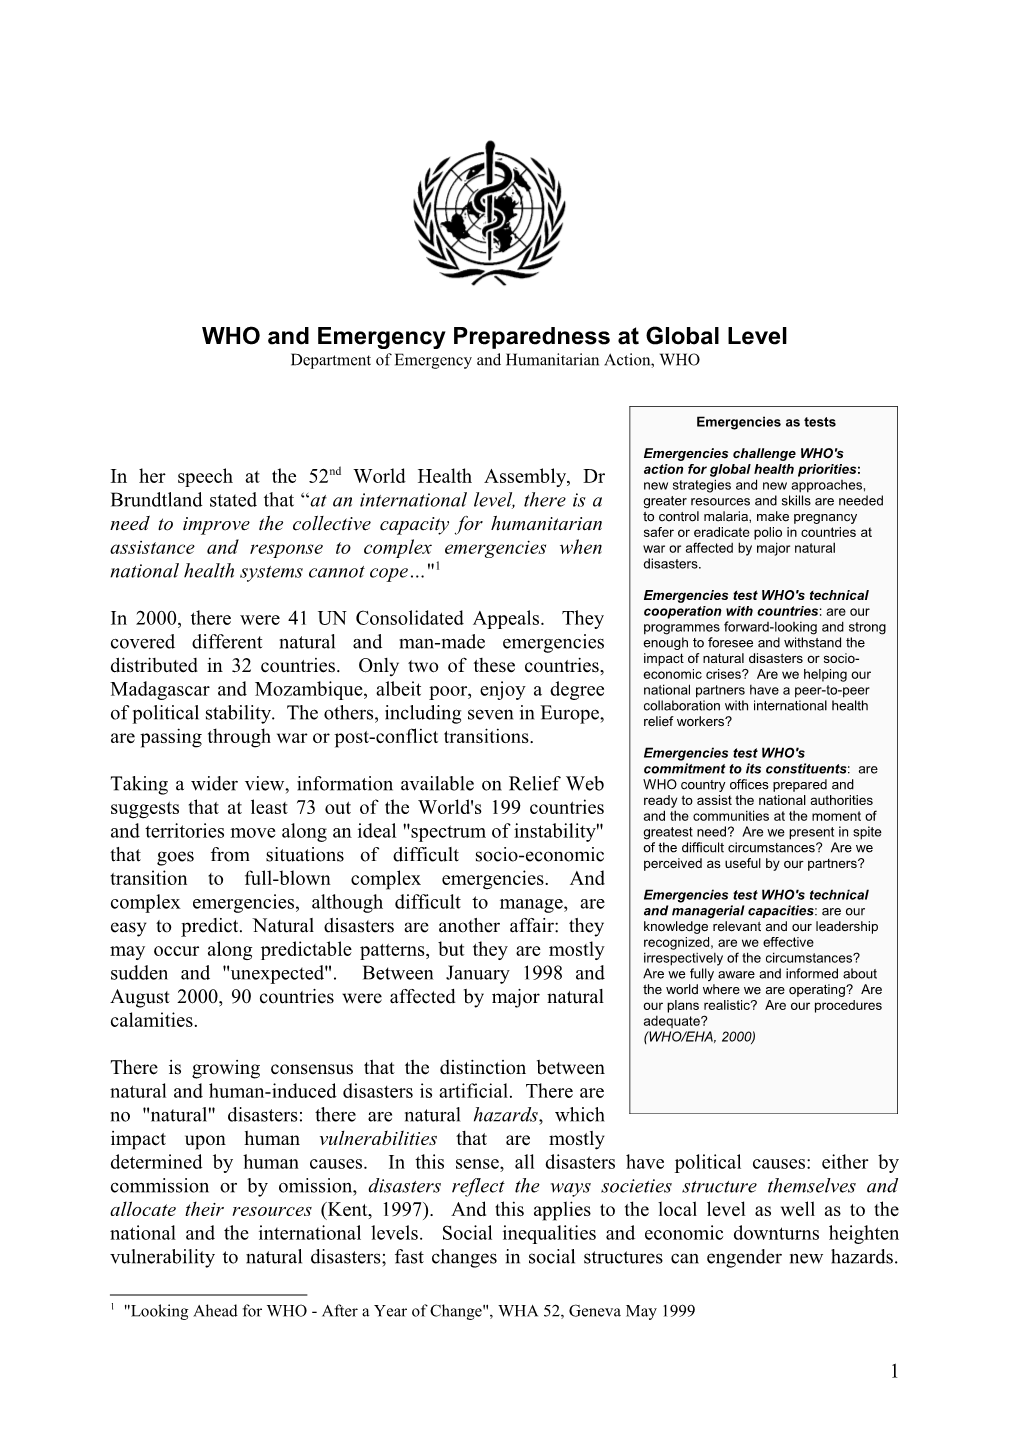 Role of WHO/HQ in Disaster Preparedness at Global Level